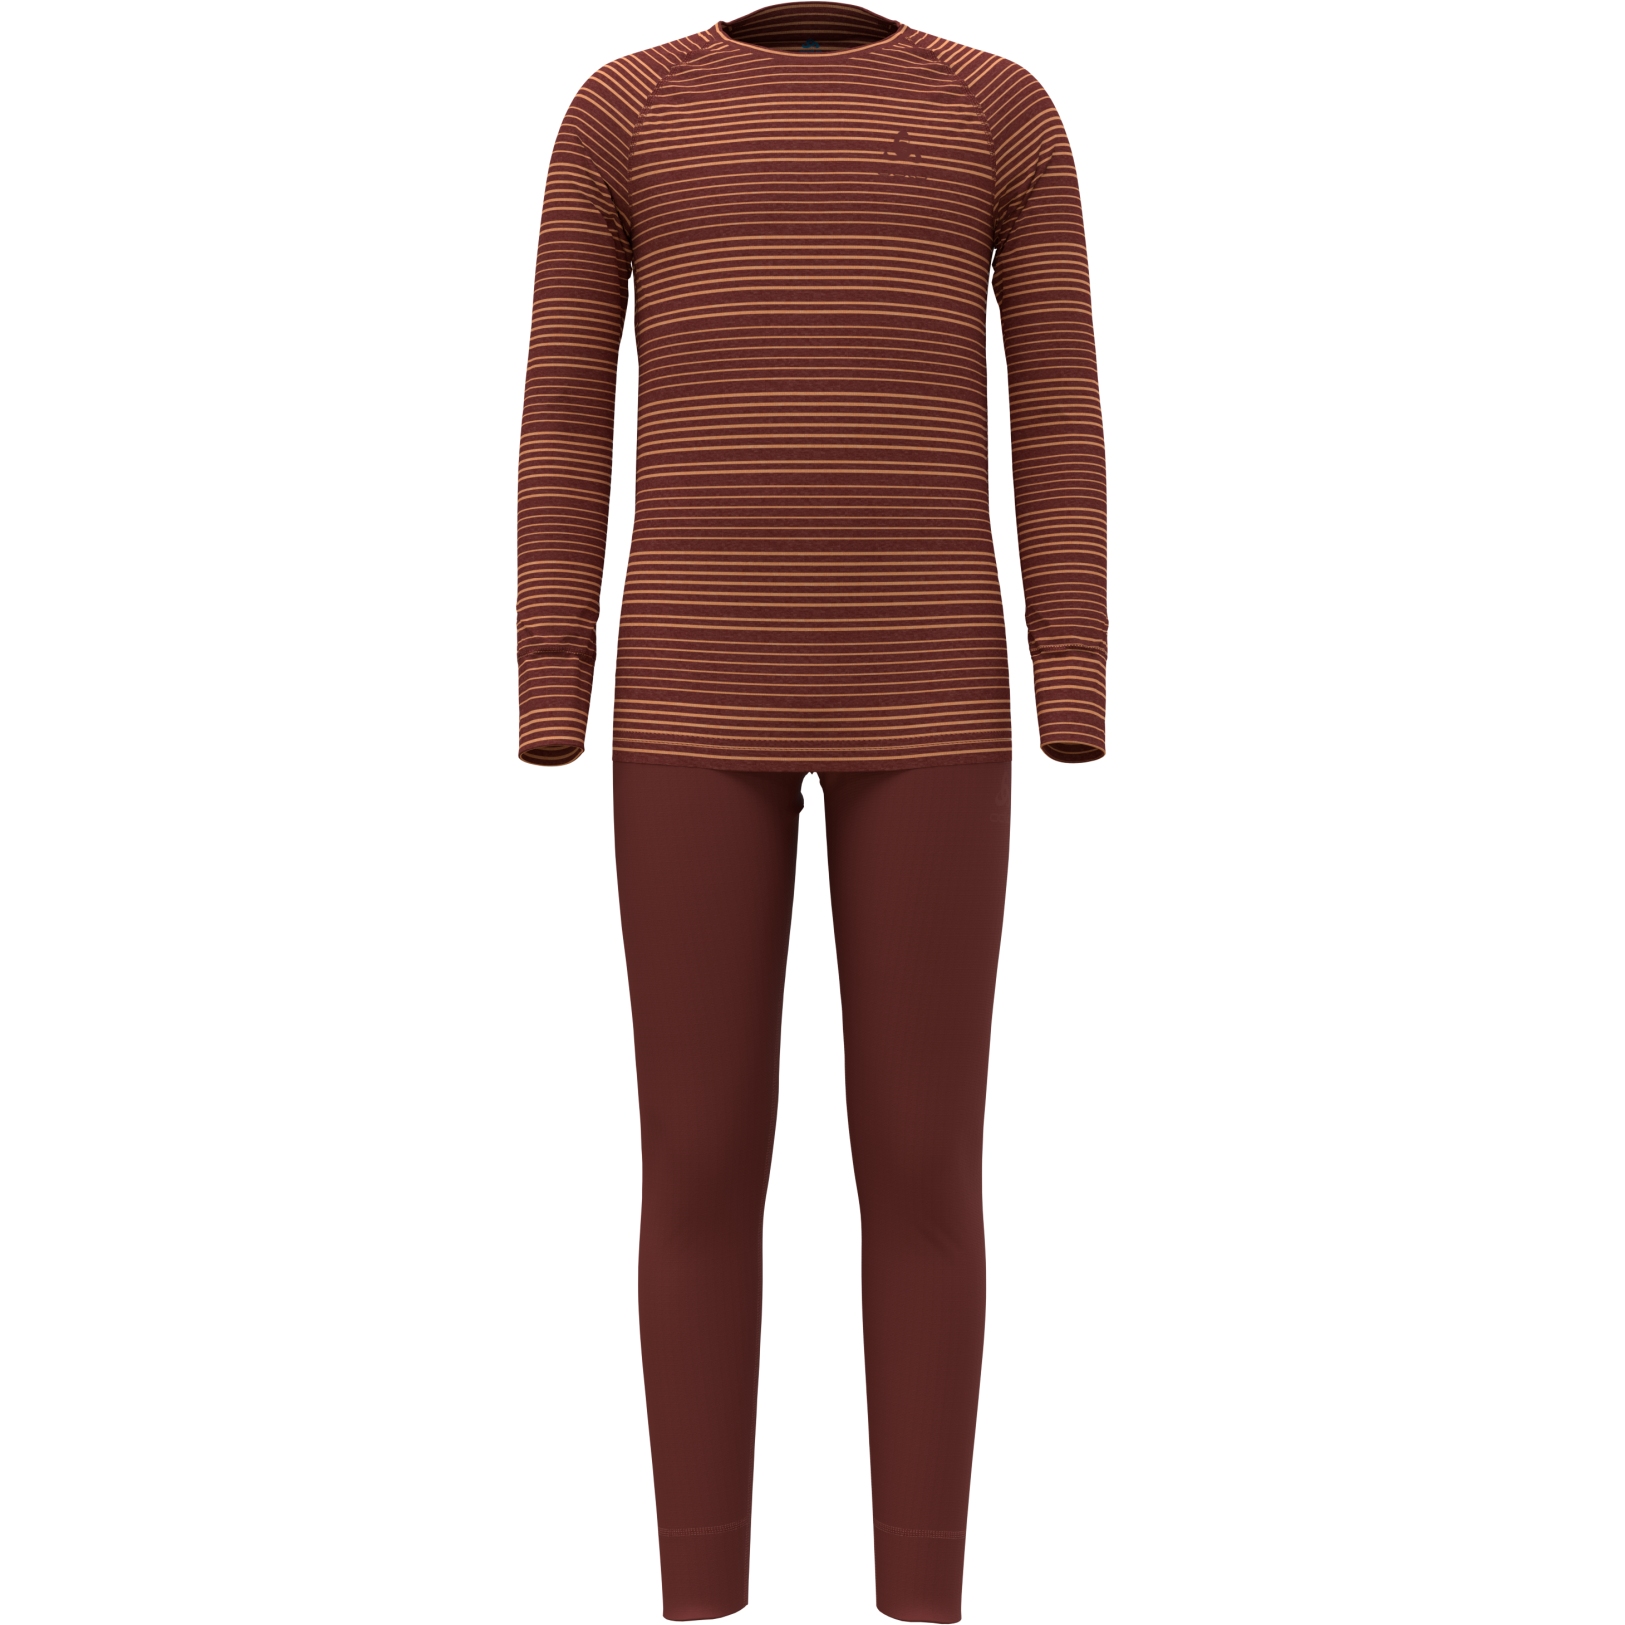 Picture of Odlo Active Warm Base Layer Set Kids - spiced apple - live wire